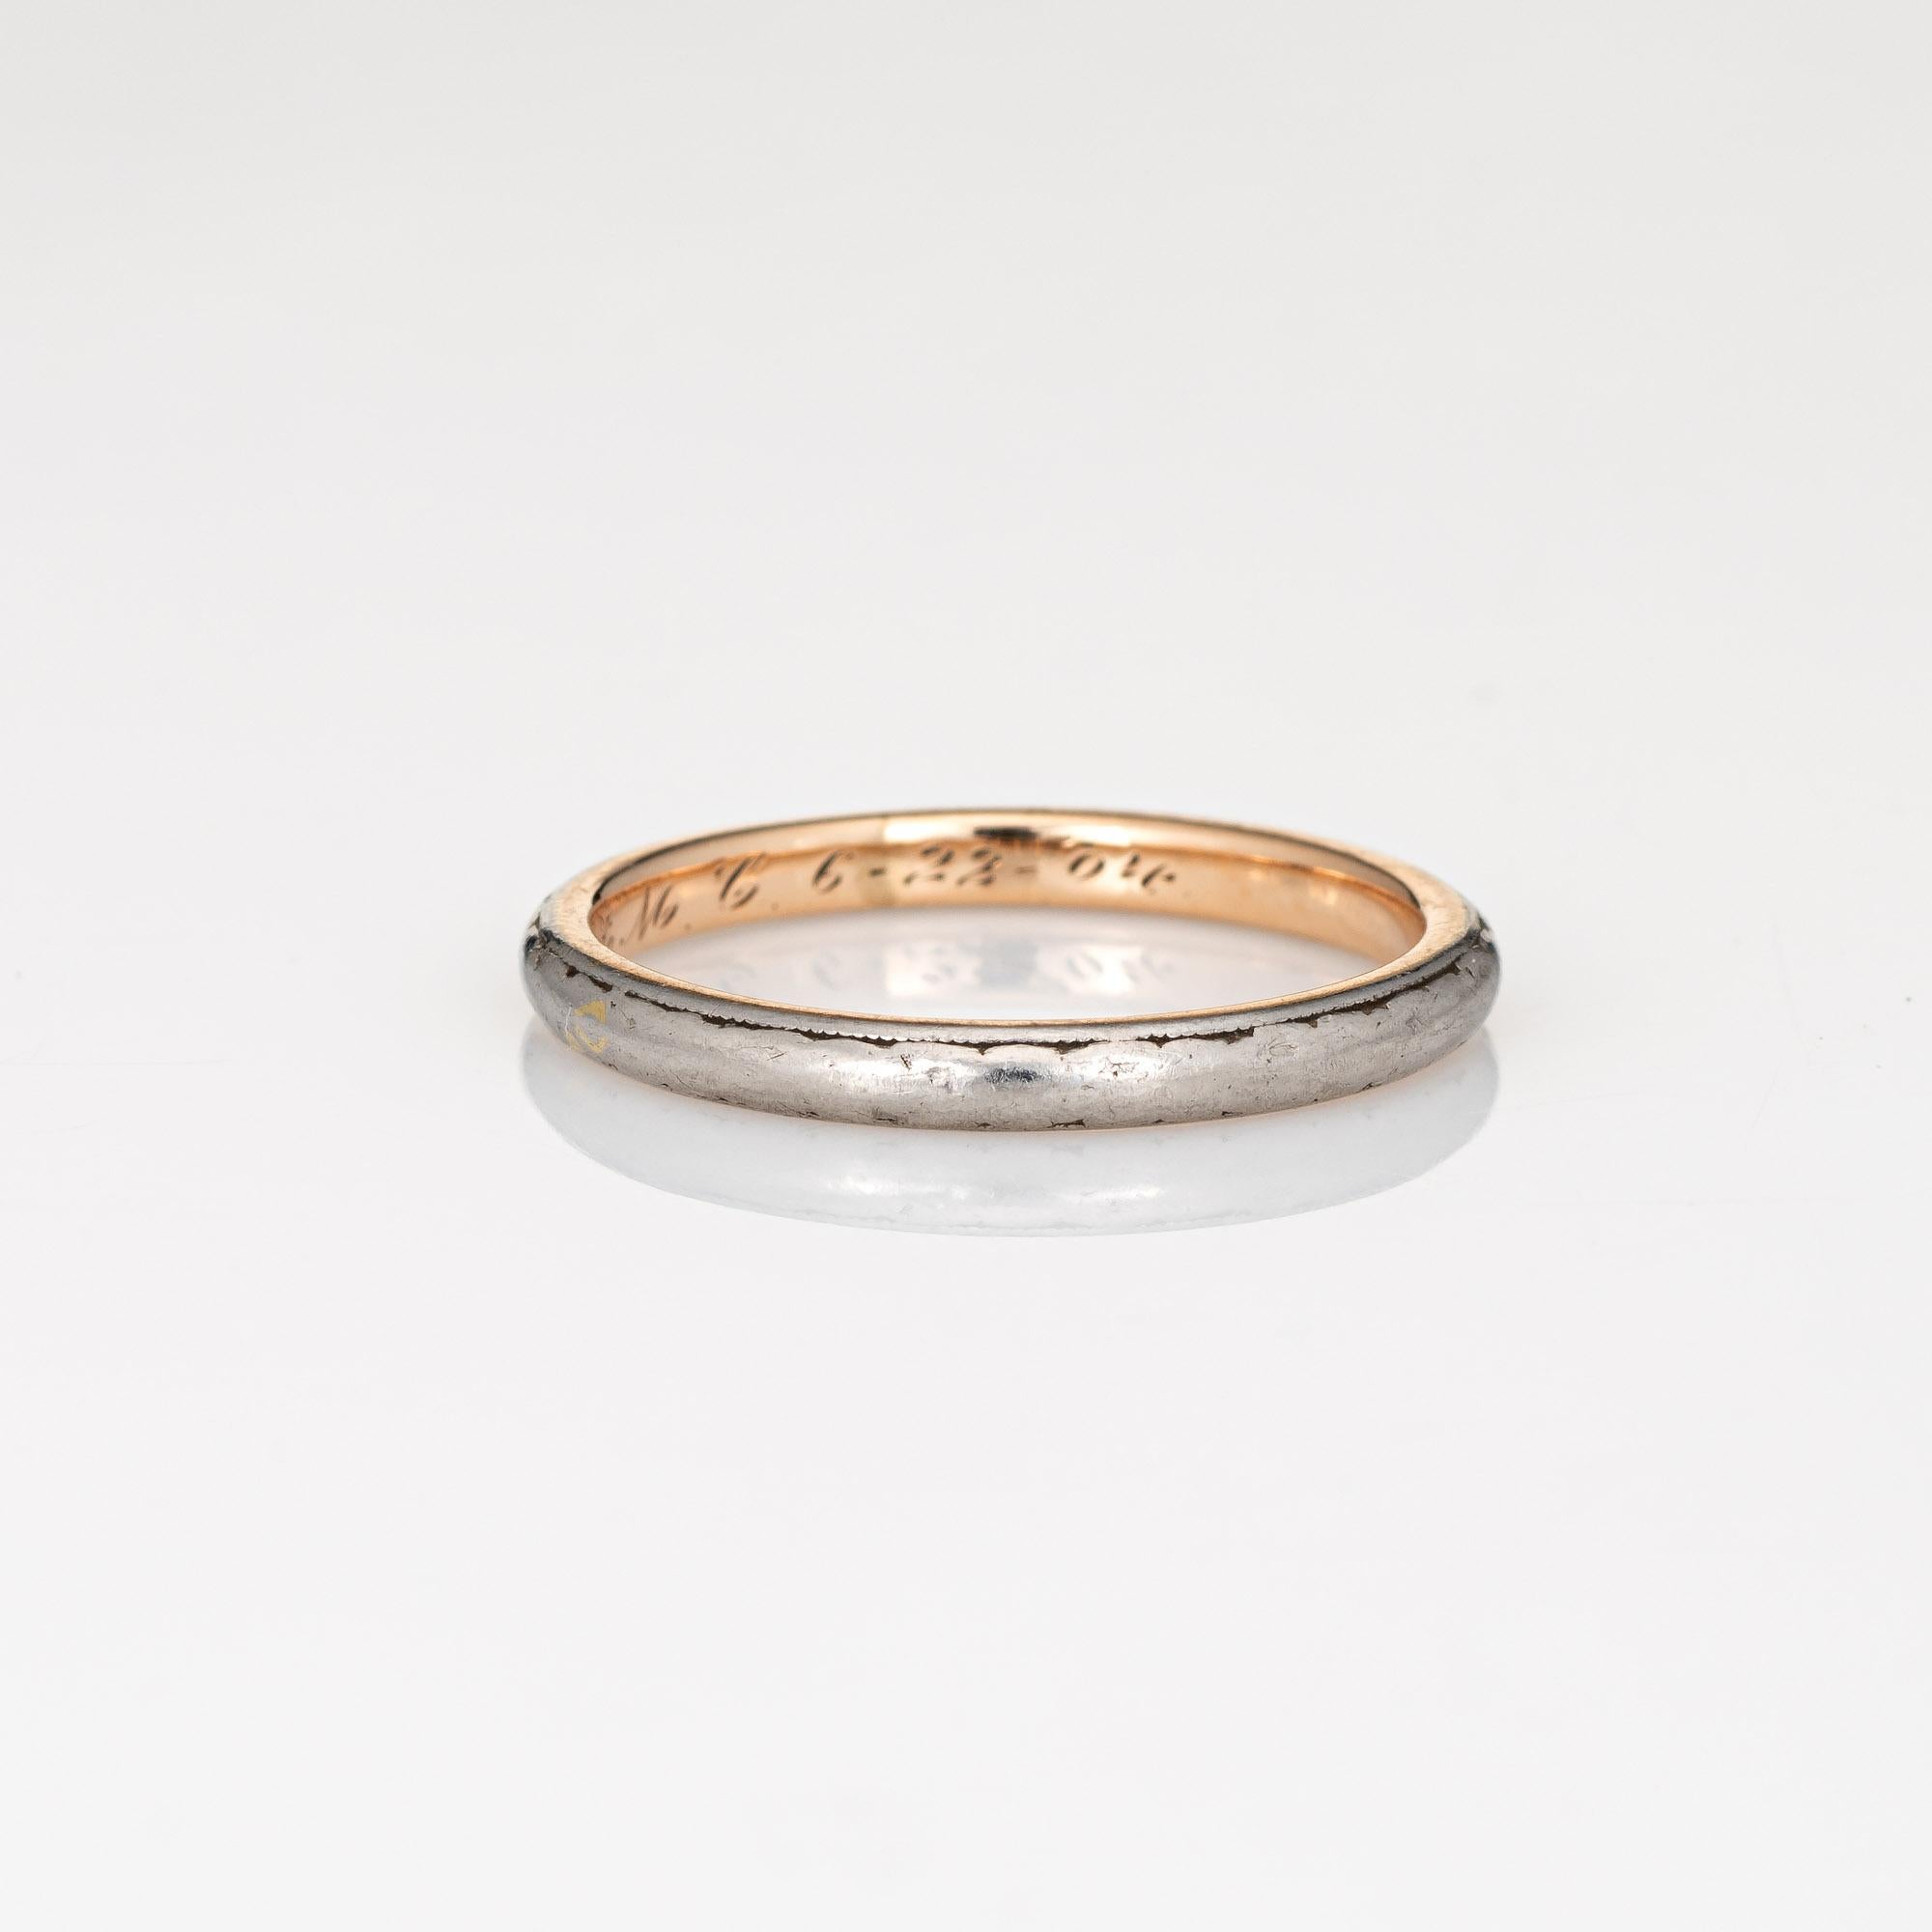 Elegant antique Edwardian wedding band (circa 1904) crafted in 14k yellow gold and platinum. 

The ring epitomizes vintage charm and would make a lovely wedding band. Also great worn alone or stacked with your jewelry from any era. The inner band is